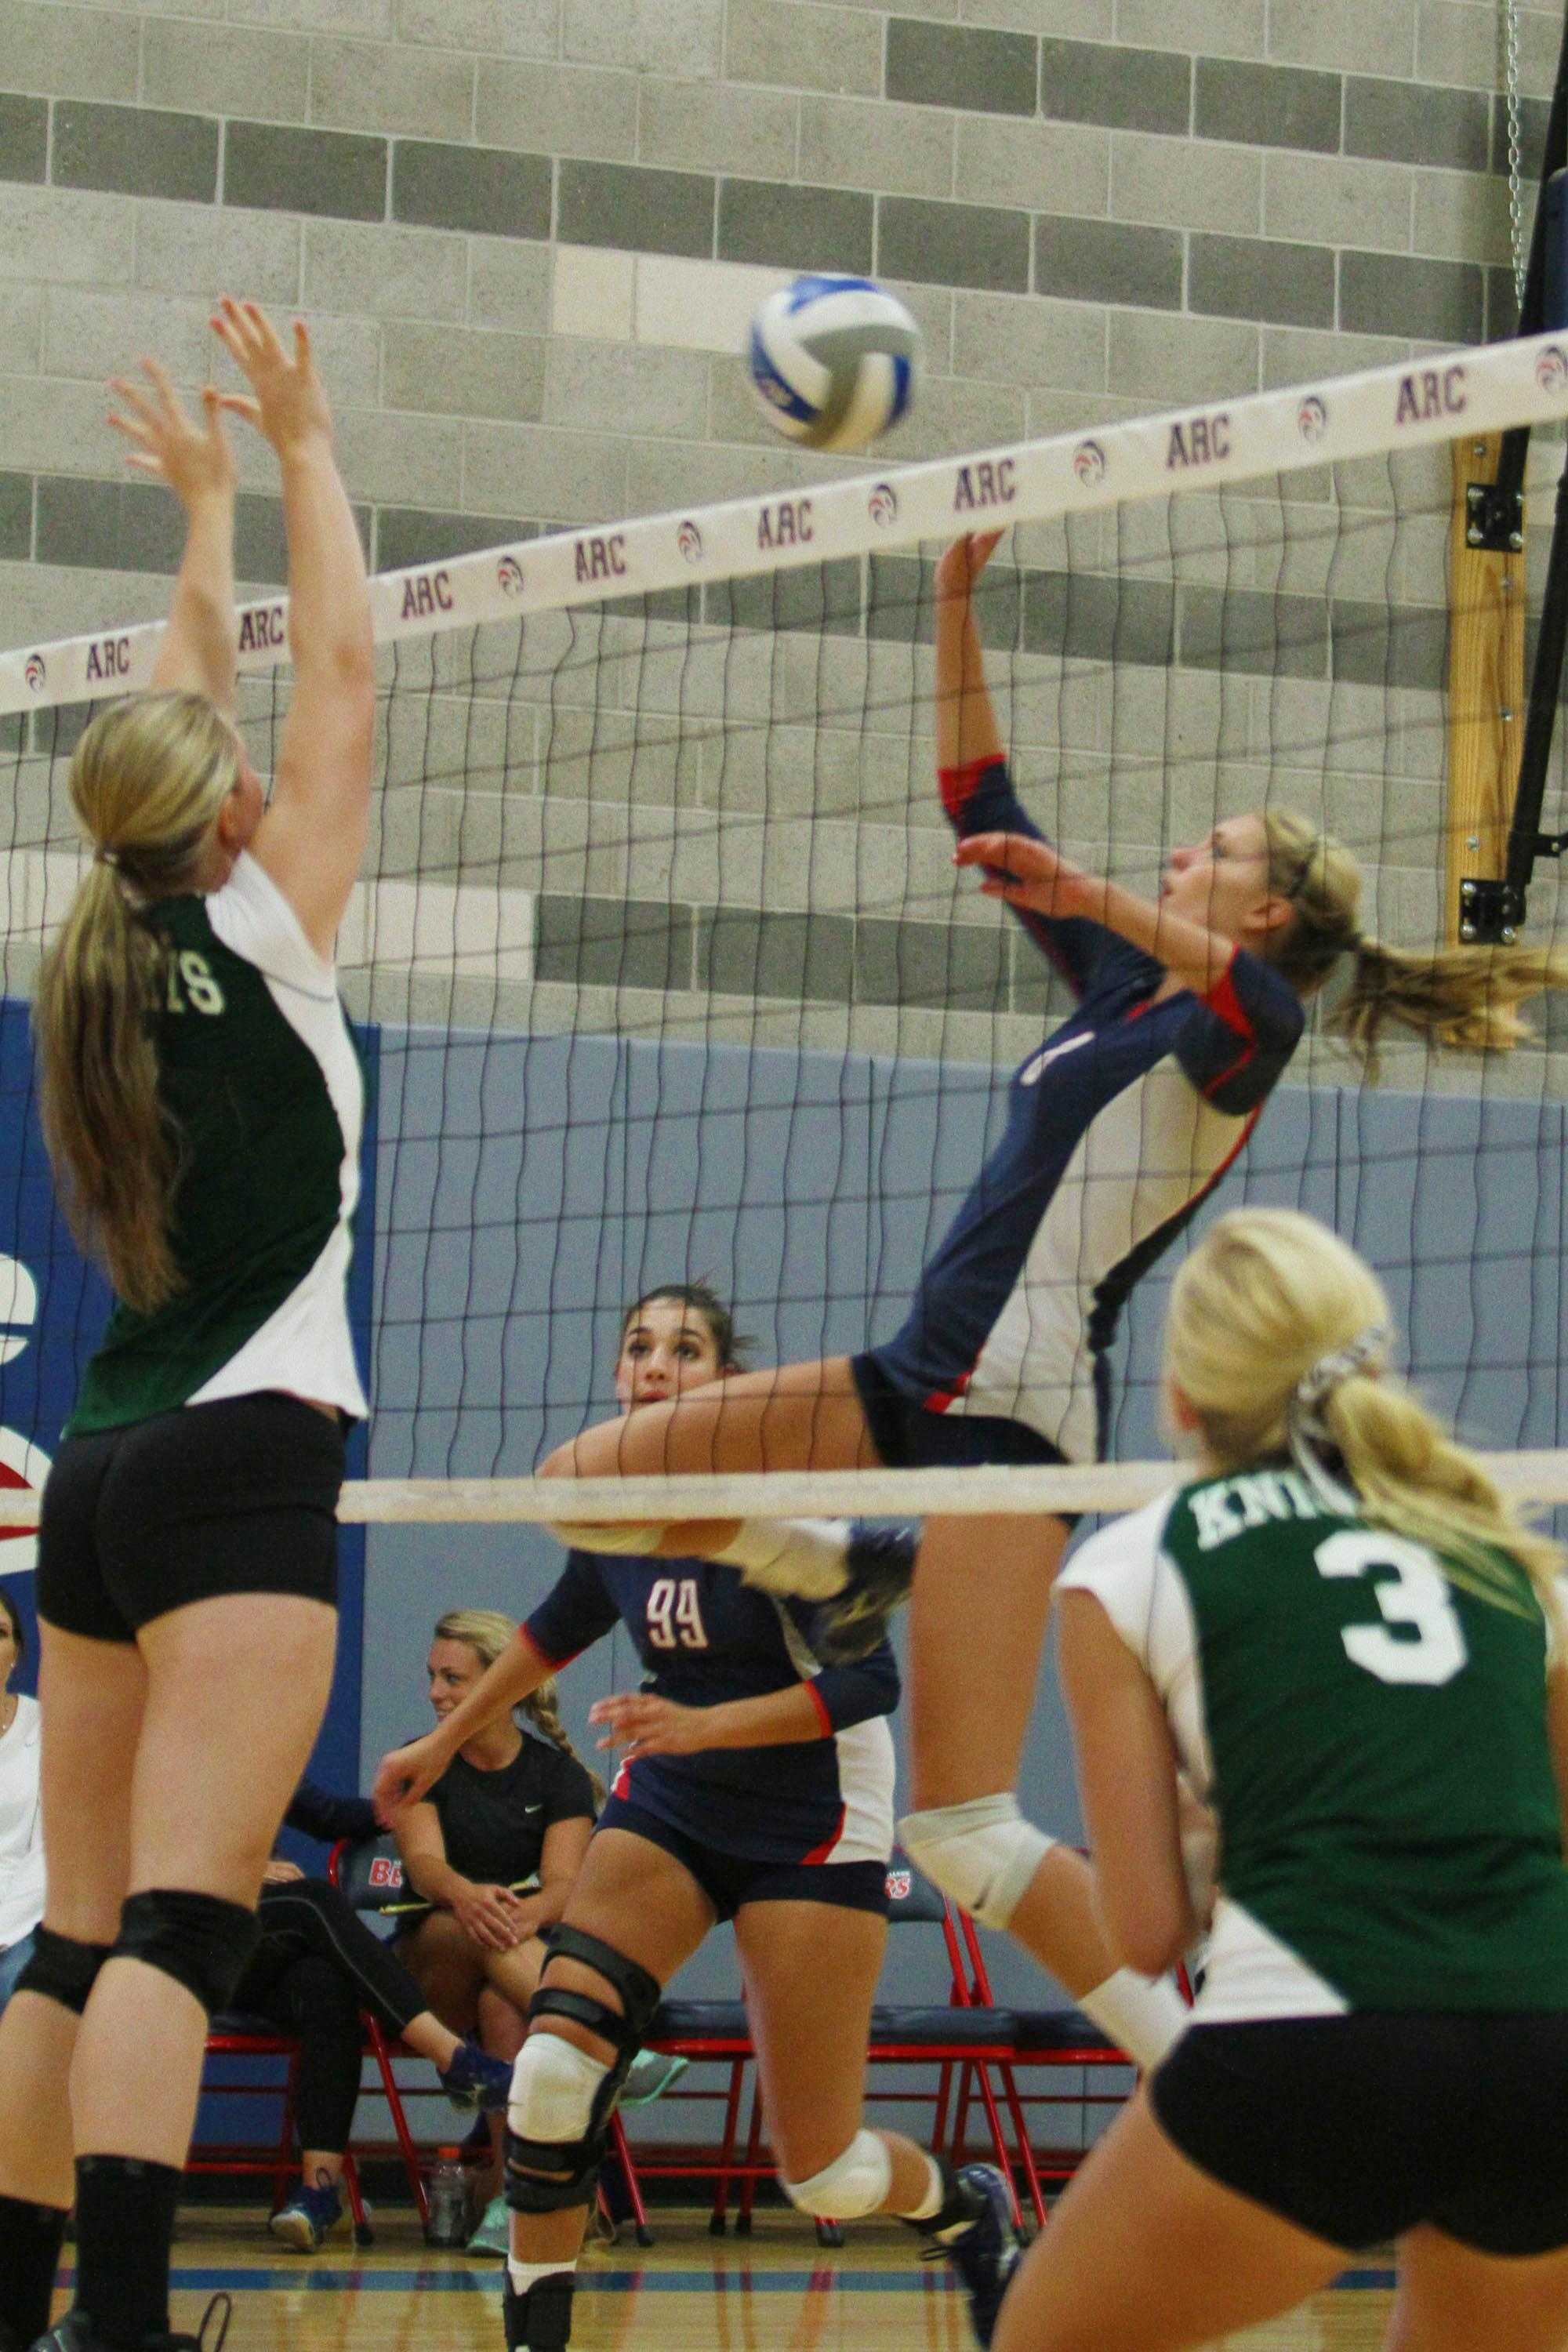 ARC dominates womens volleyball double header on Sept. 12